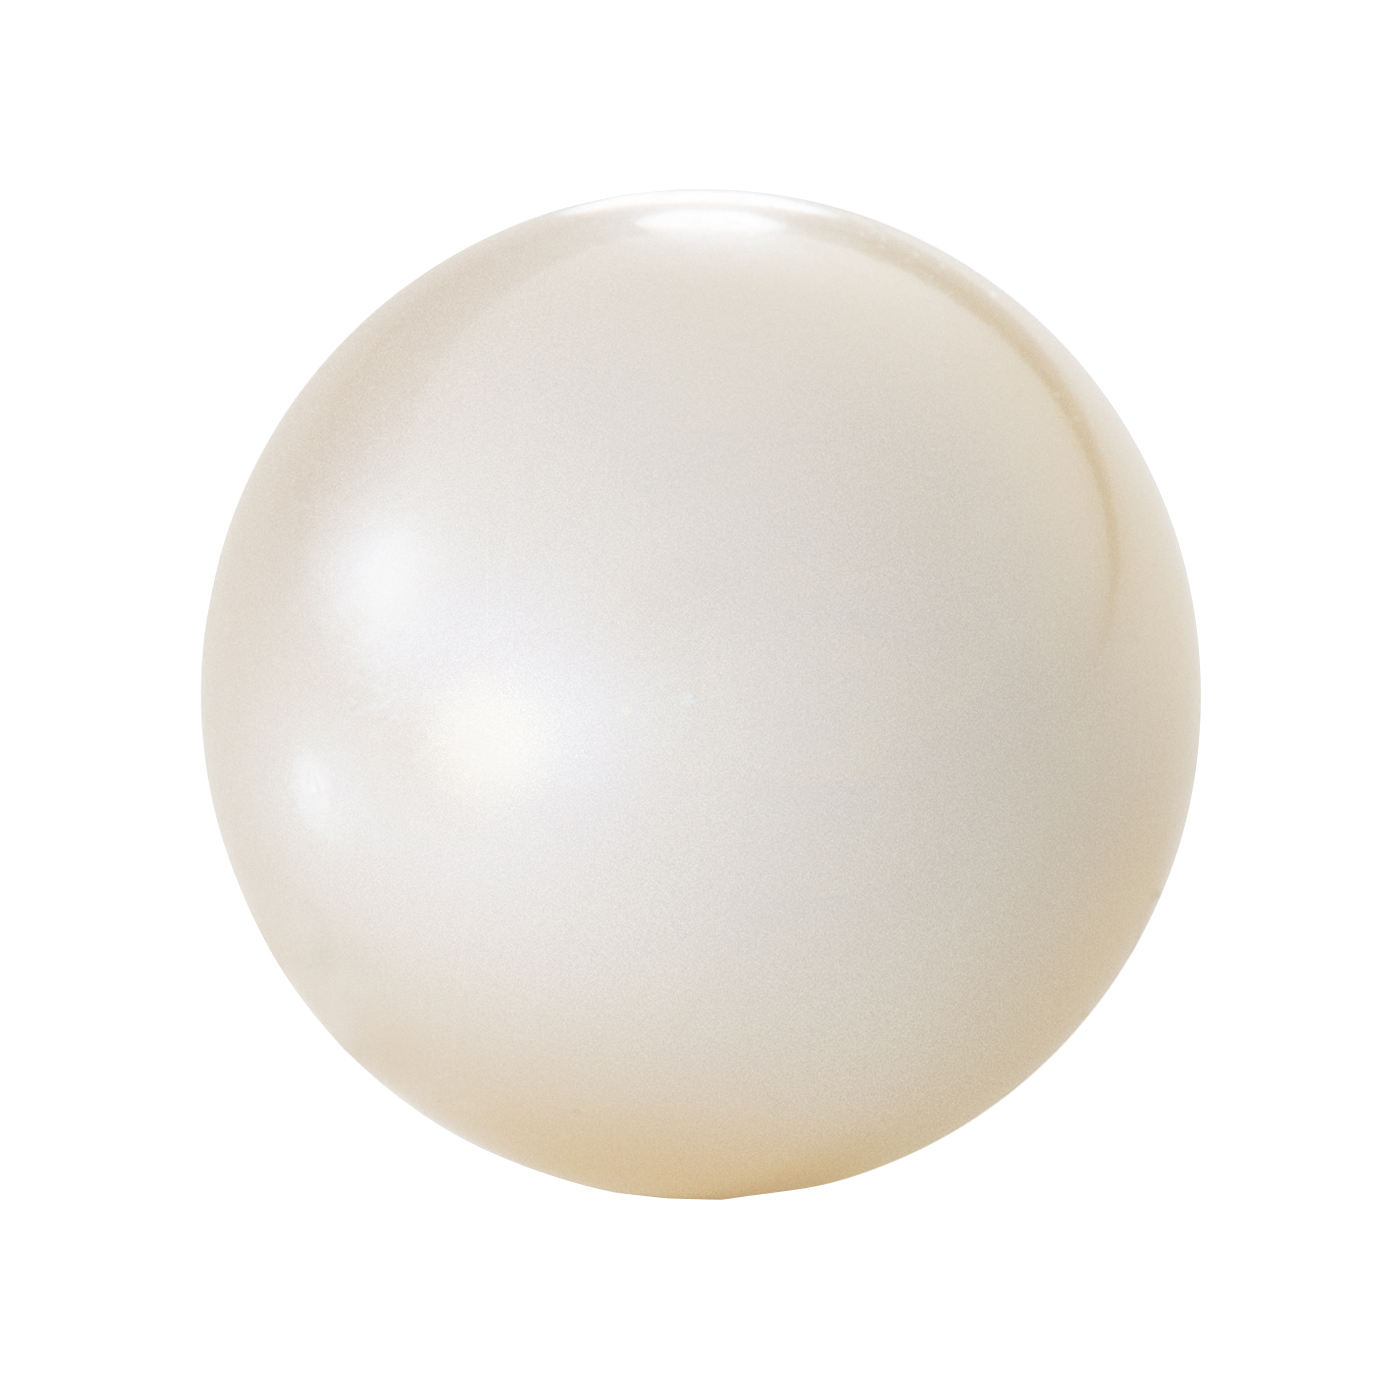 Cultured Pearl, Freshwater, 4/4, ø 5.5-6.0 mm, White - 1 piece